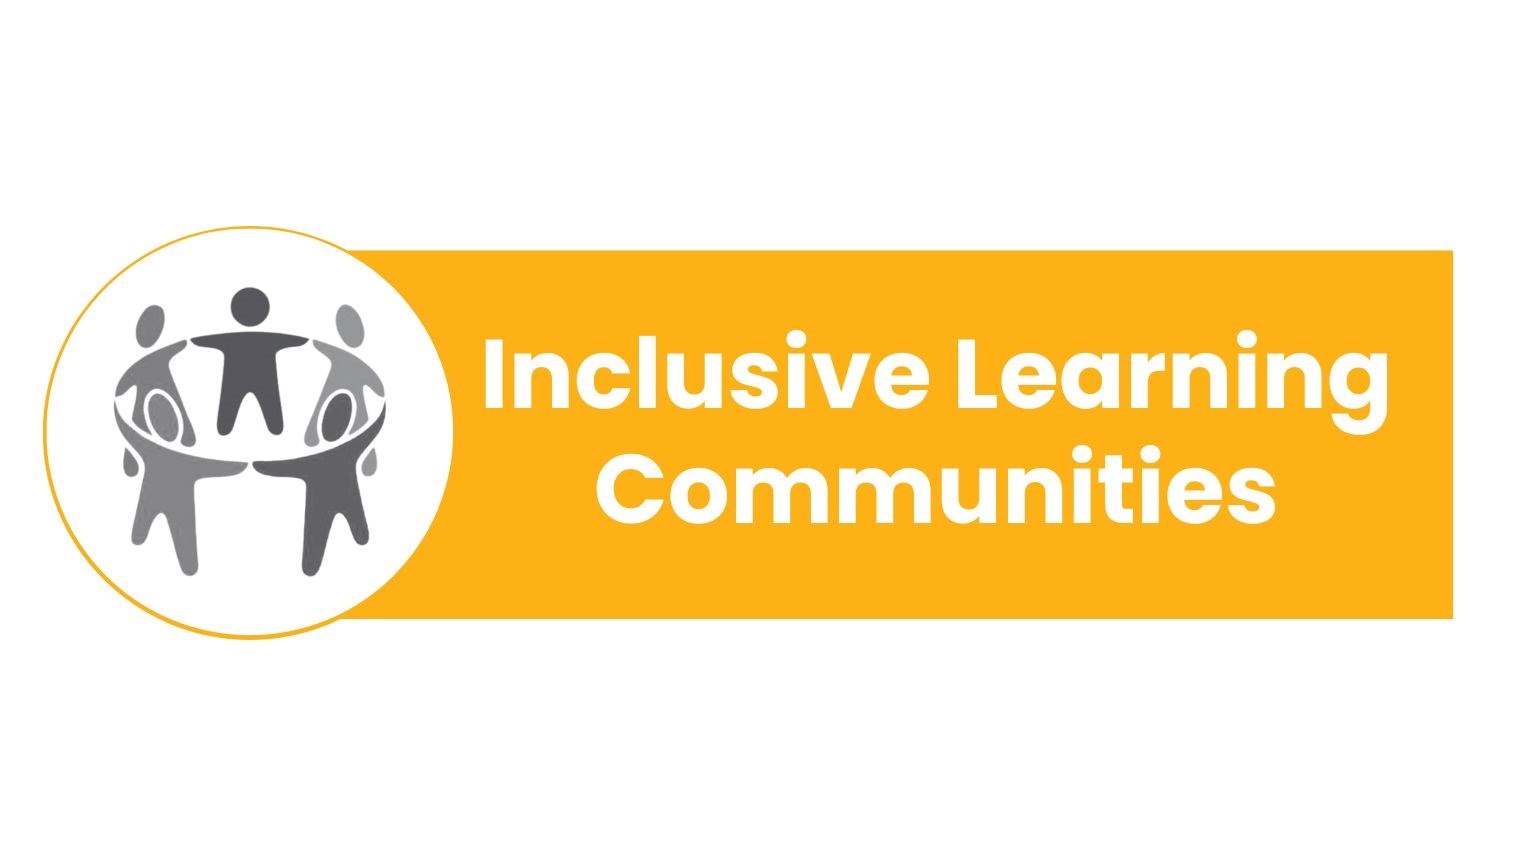 Inclusive Learning Communities